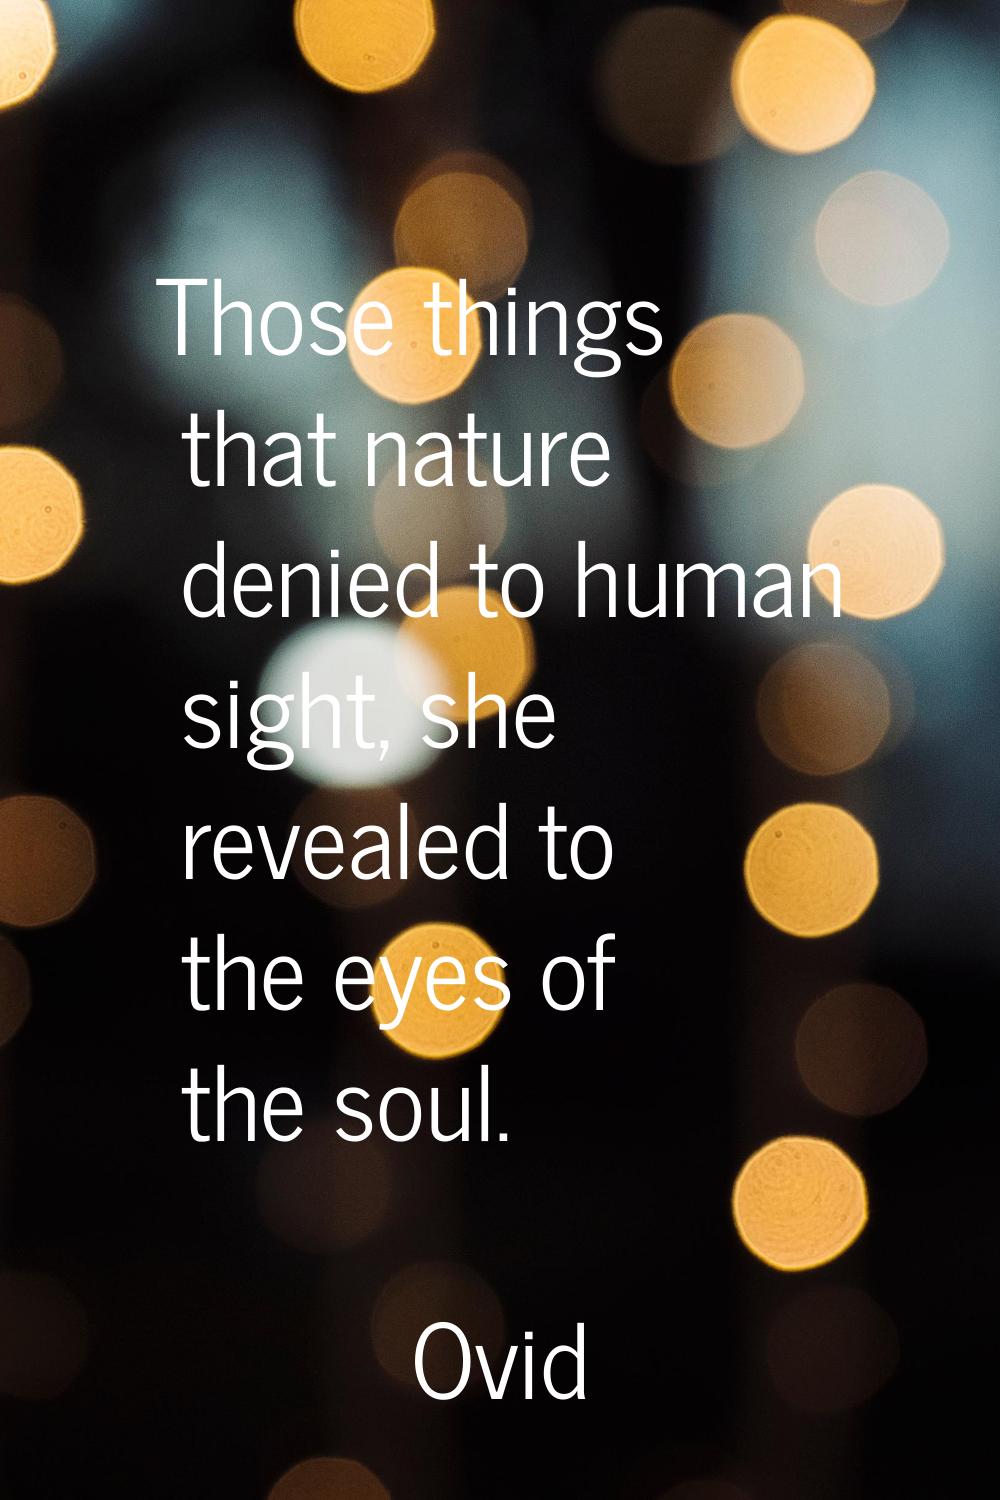 Those things that nature denied to human sight, she revealed to the eyes of the soul.